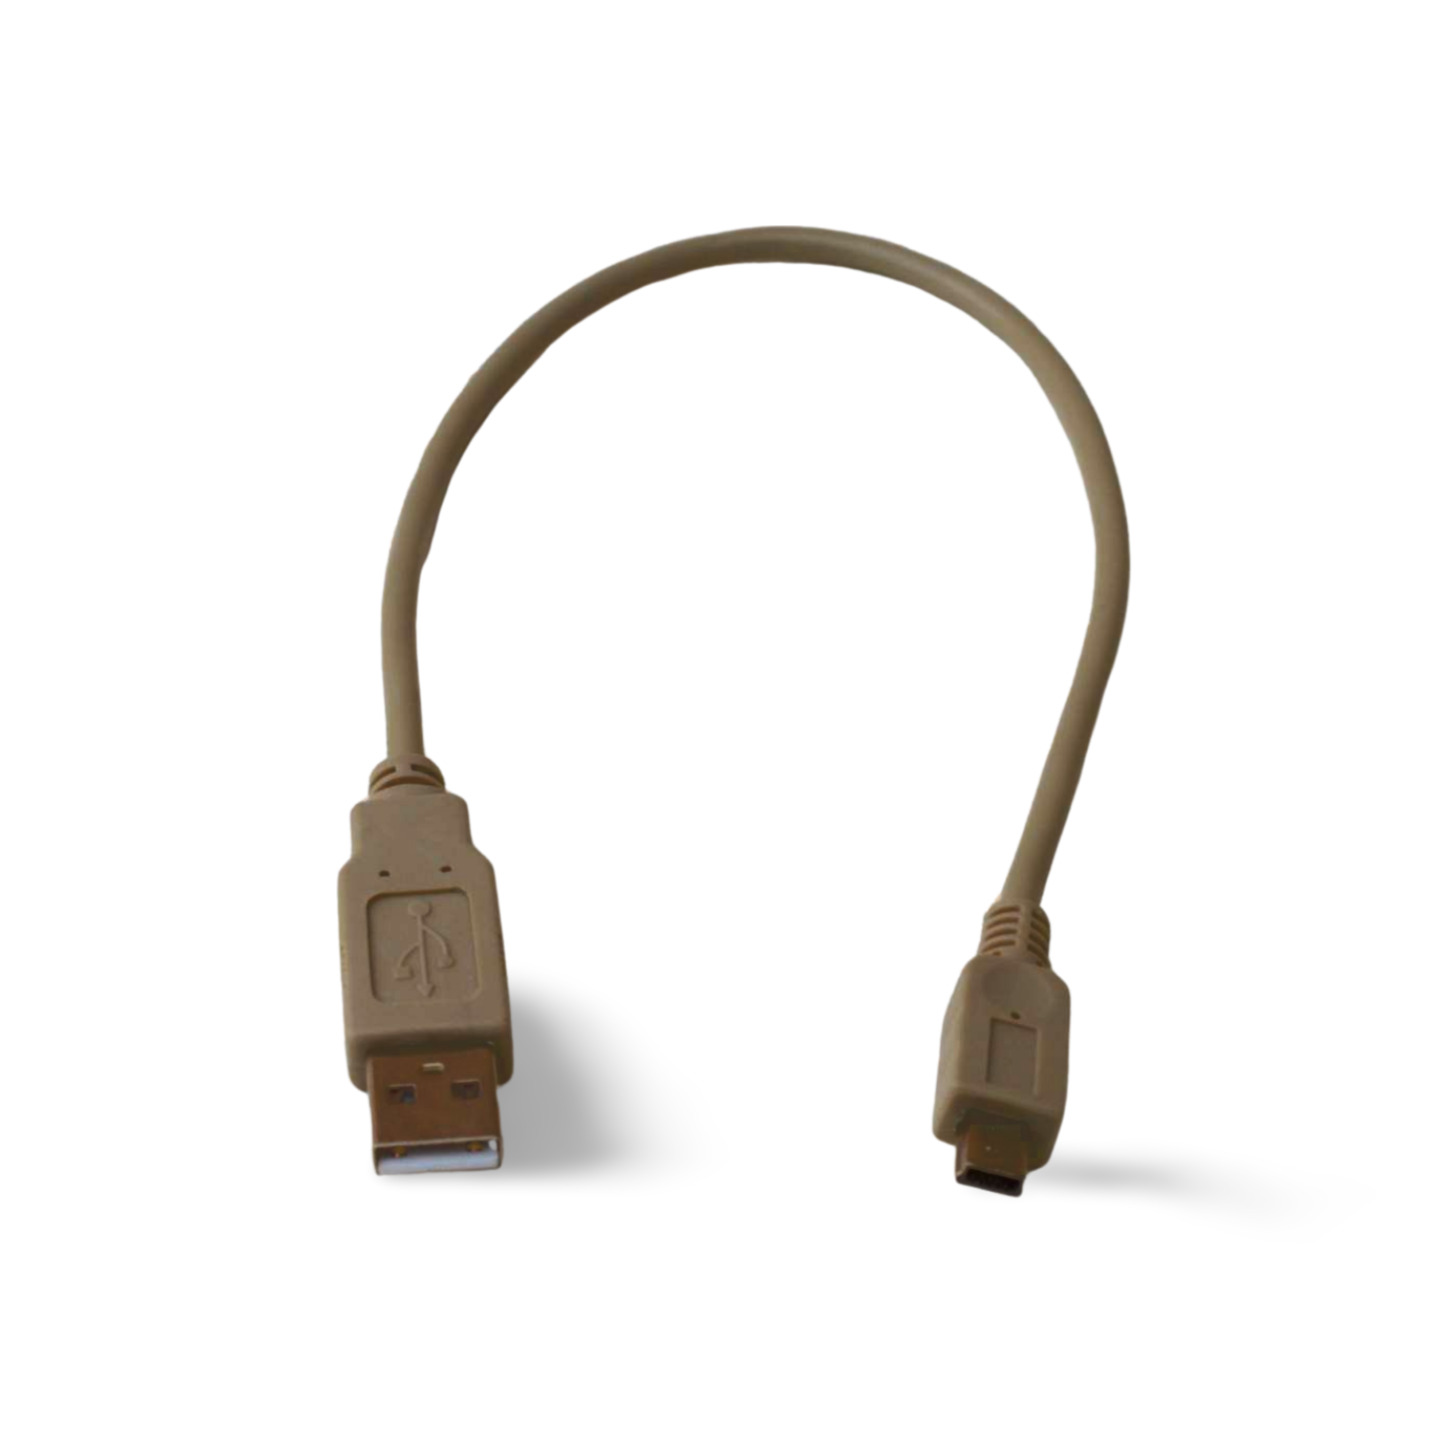 1ft USB Type A to Mini B 5 Pin Cable - Beige